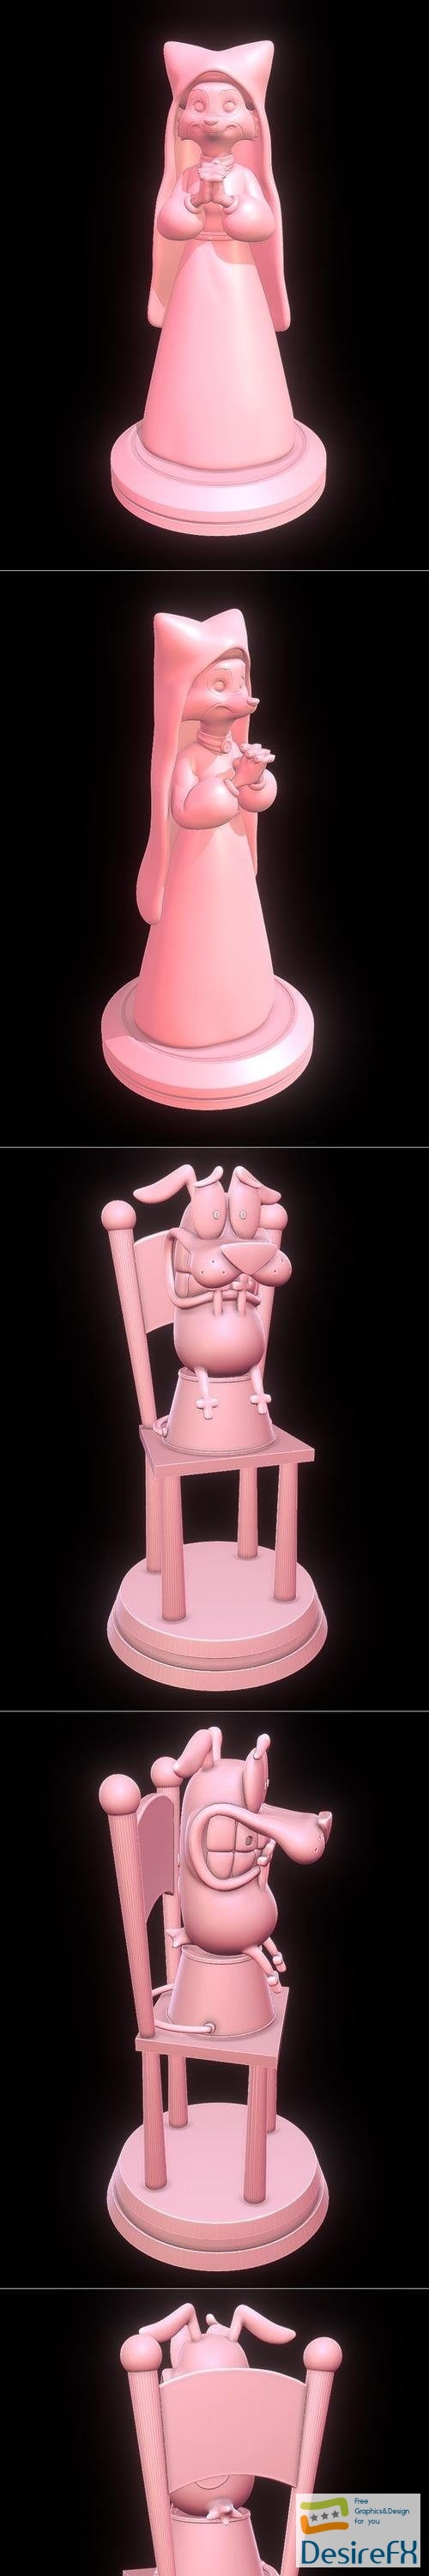 Courage the Cowardly Dog and Maid Marian - Robin Hood – 3D Print